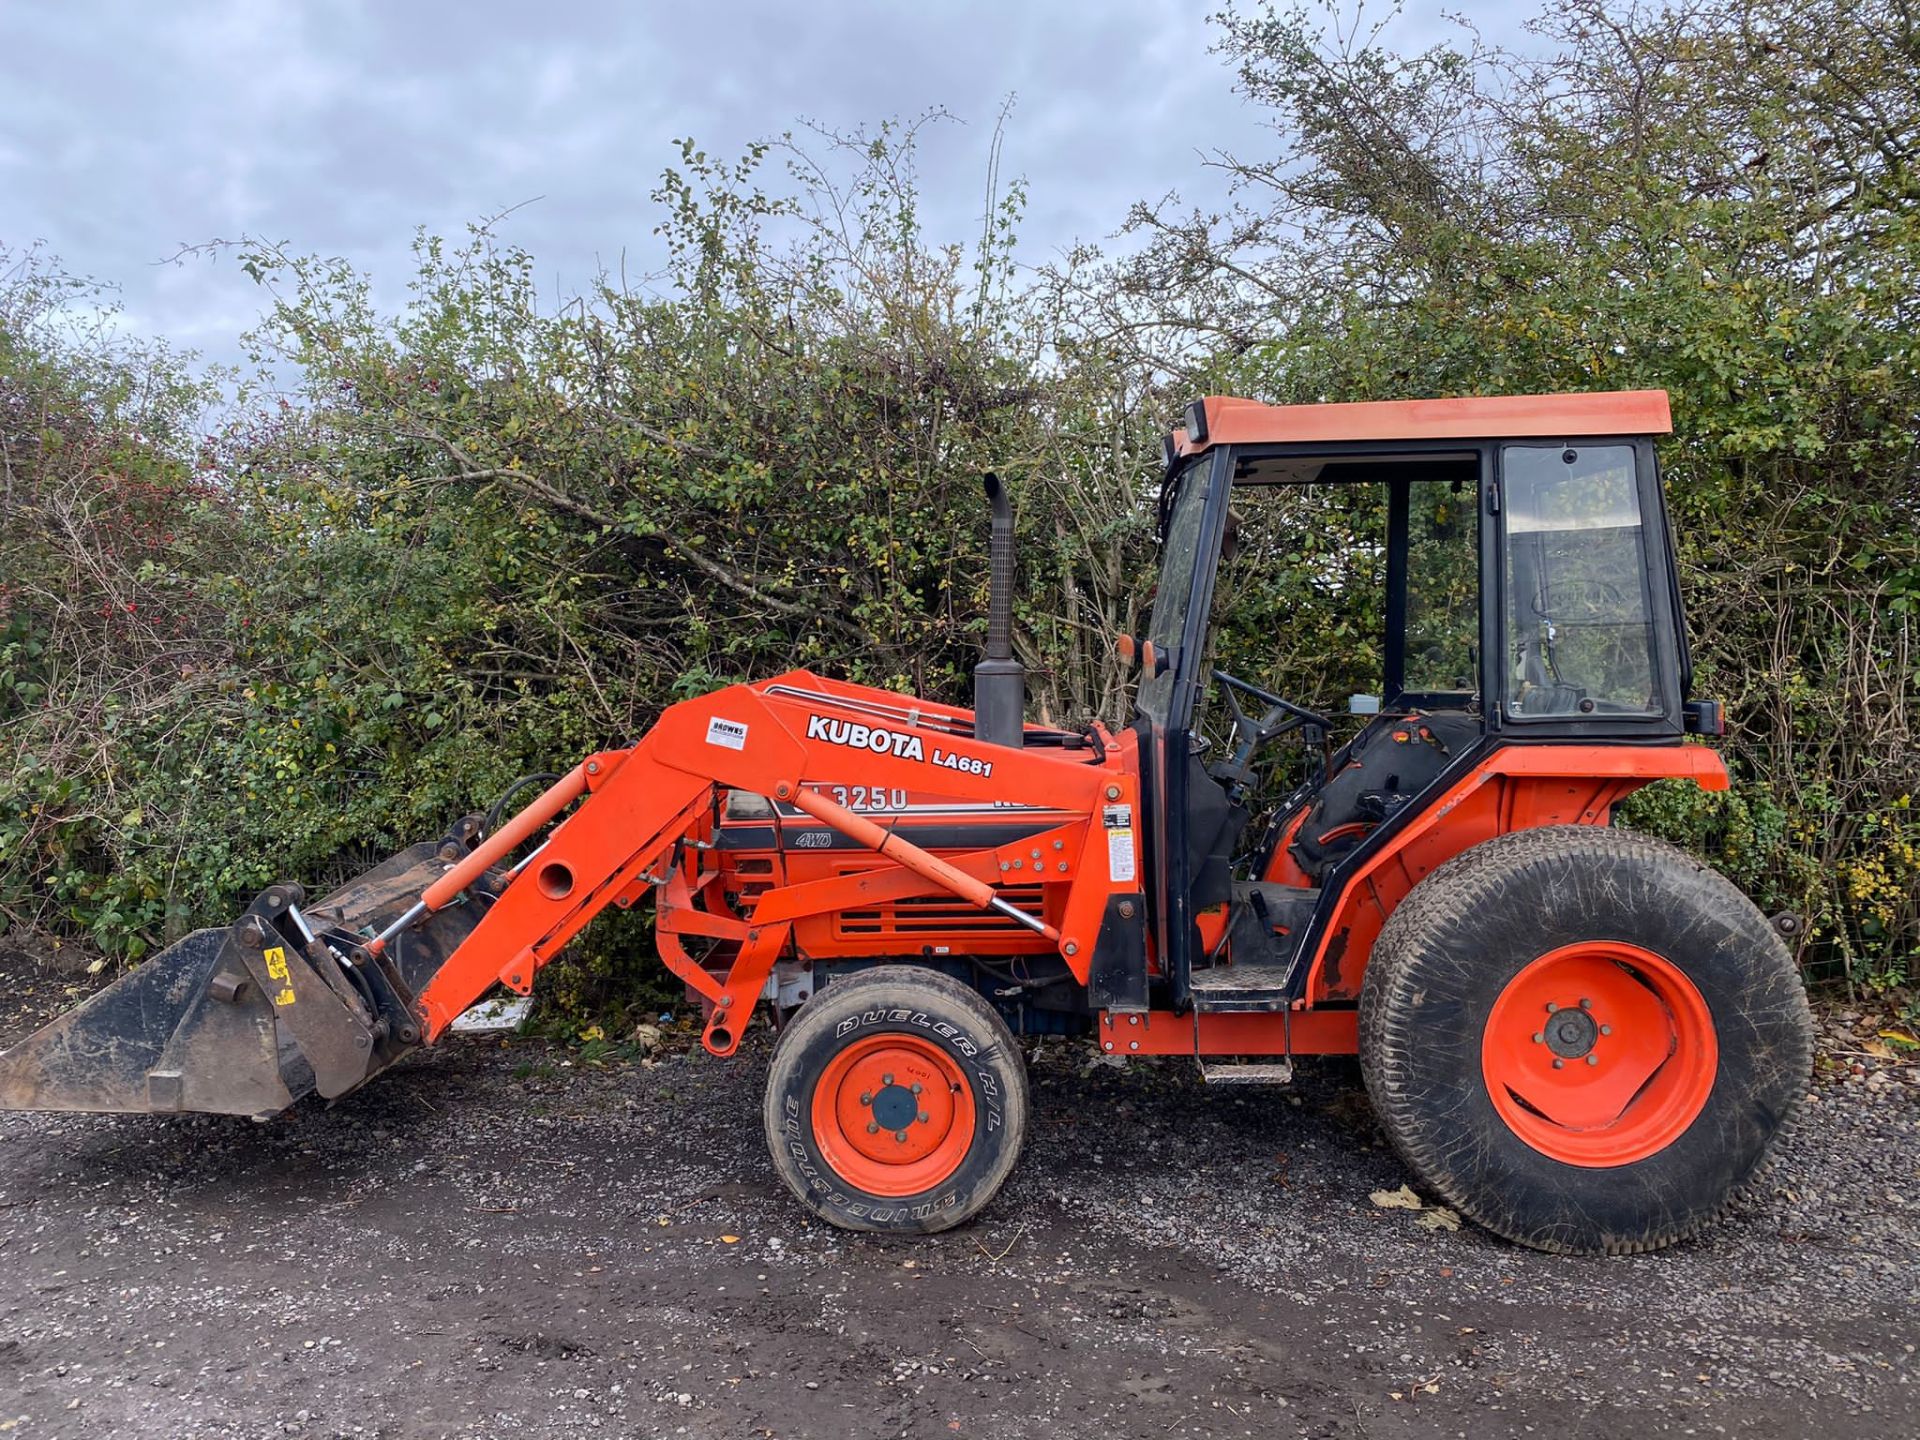 KUBOTA L3250D 4WD TRACTOR FRONT LOADER.LOCATION NORTH YORKSHIRE. - Image 4 of 5